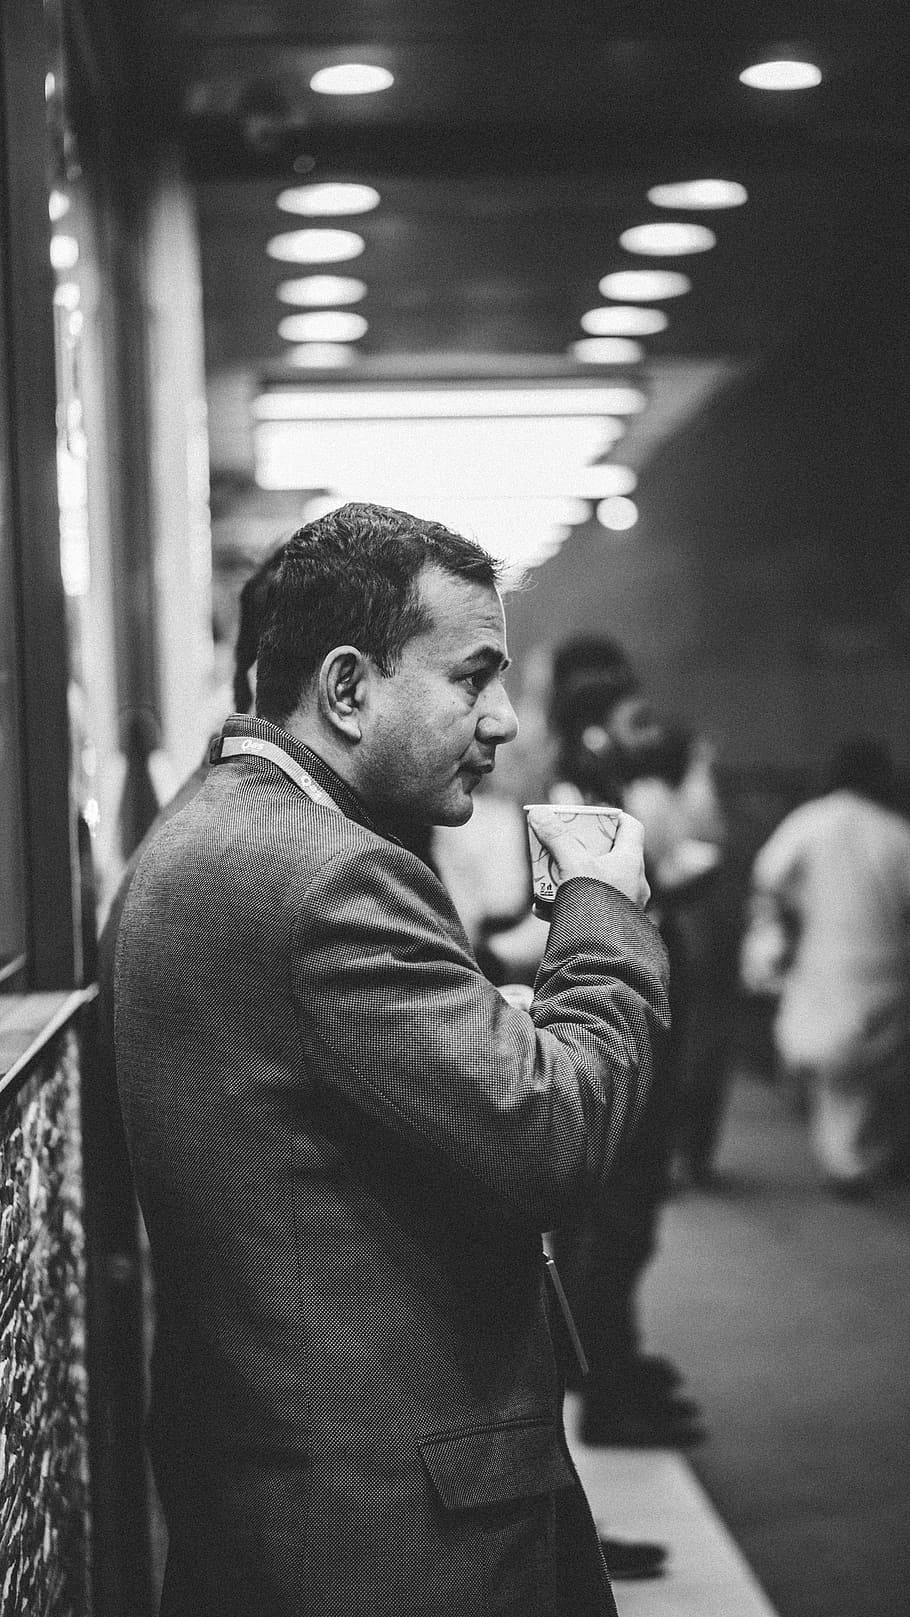 grayscale photo of man drinking on plastic cup, grayscale and selective focus photography of man holding paper cup